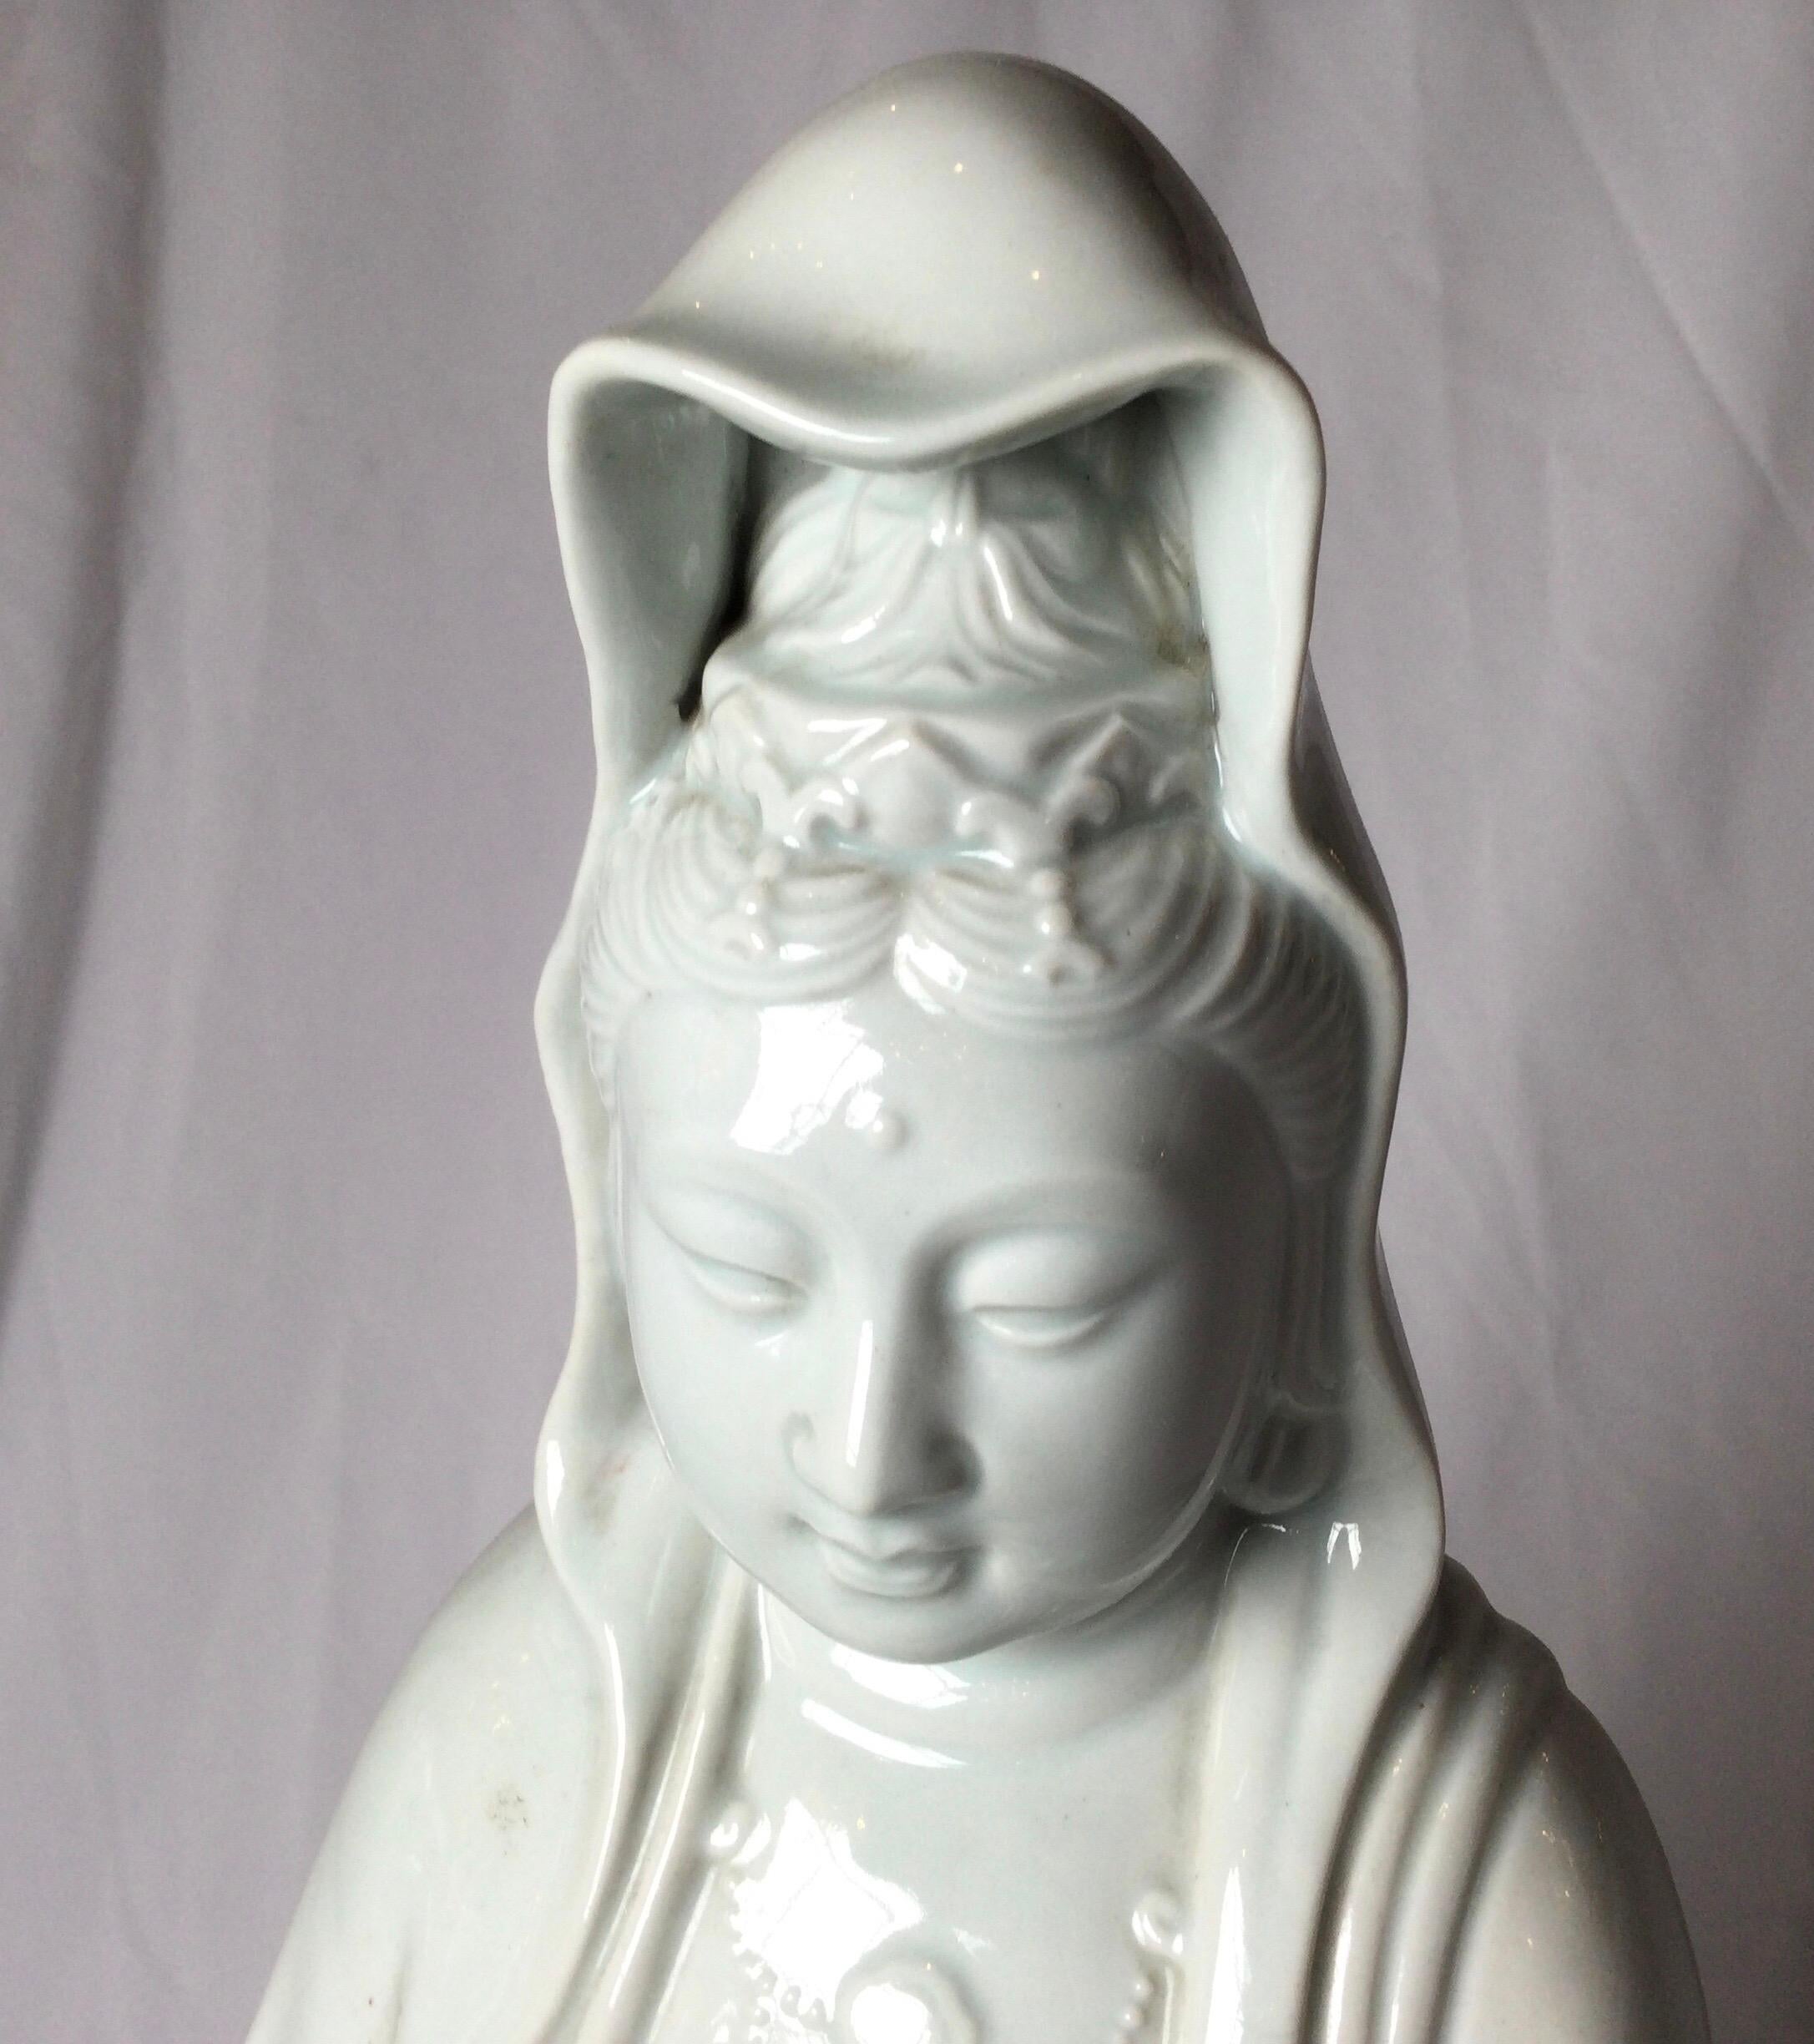 A Classic Japanese Kannon figure in blanc de chine porcelain, circa 1910. Measures: 25 inches tall.